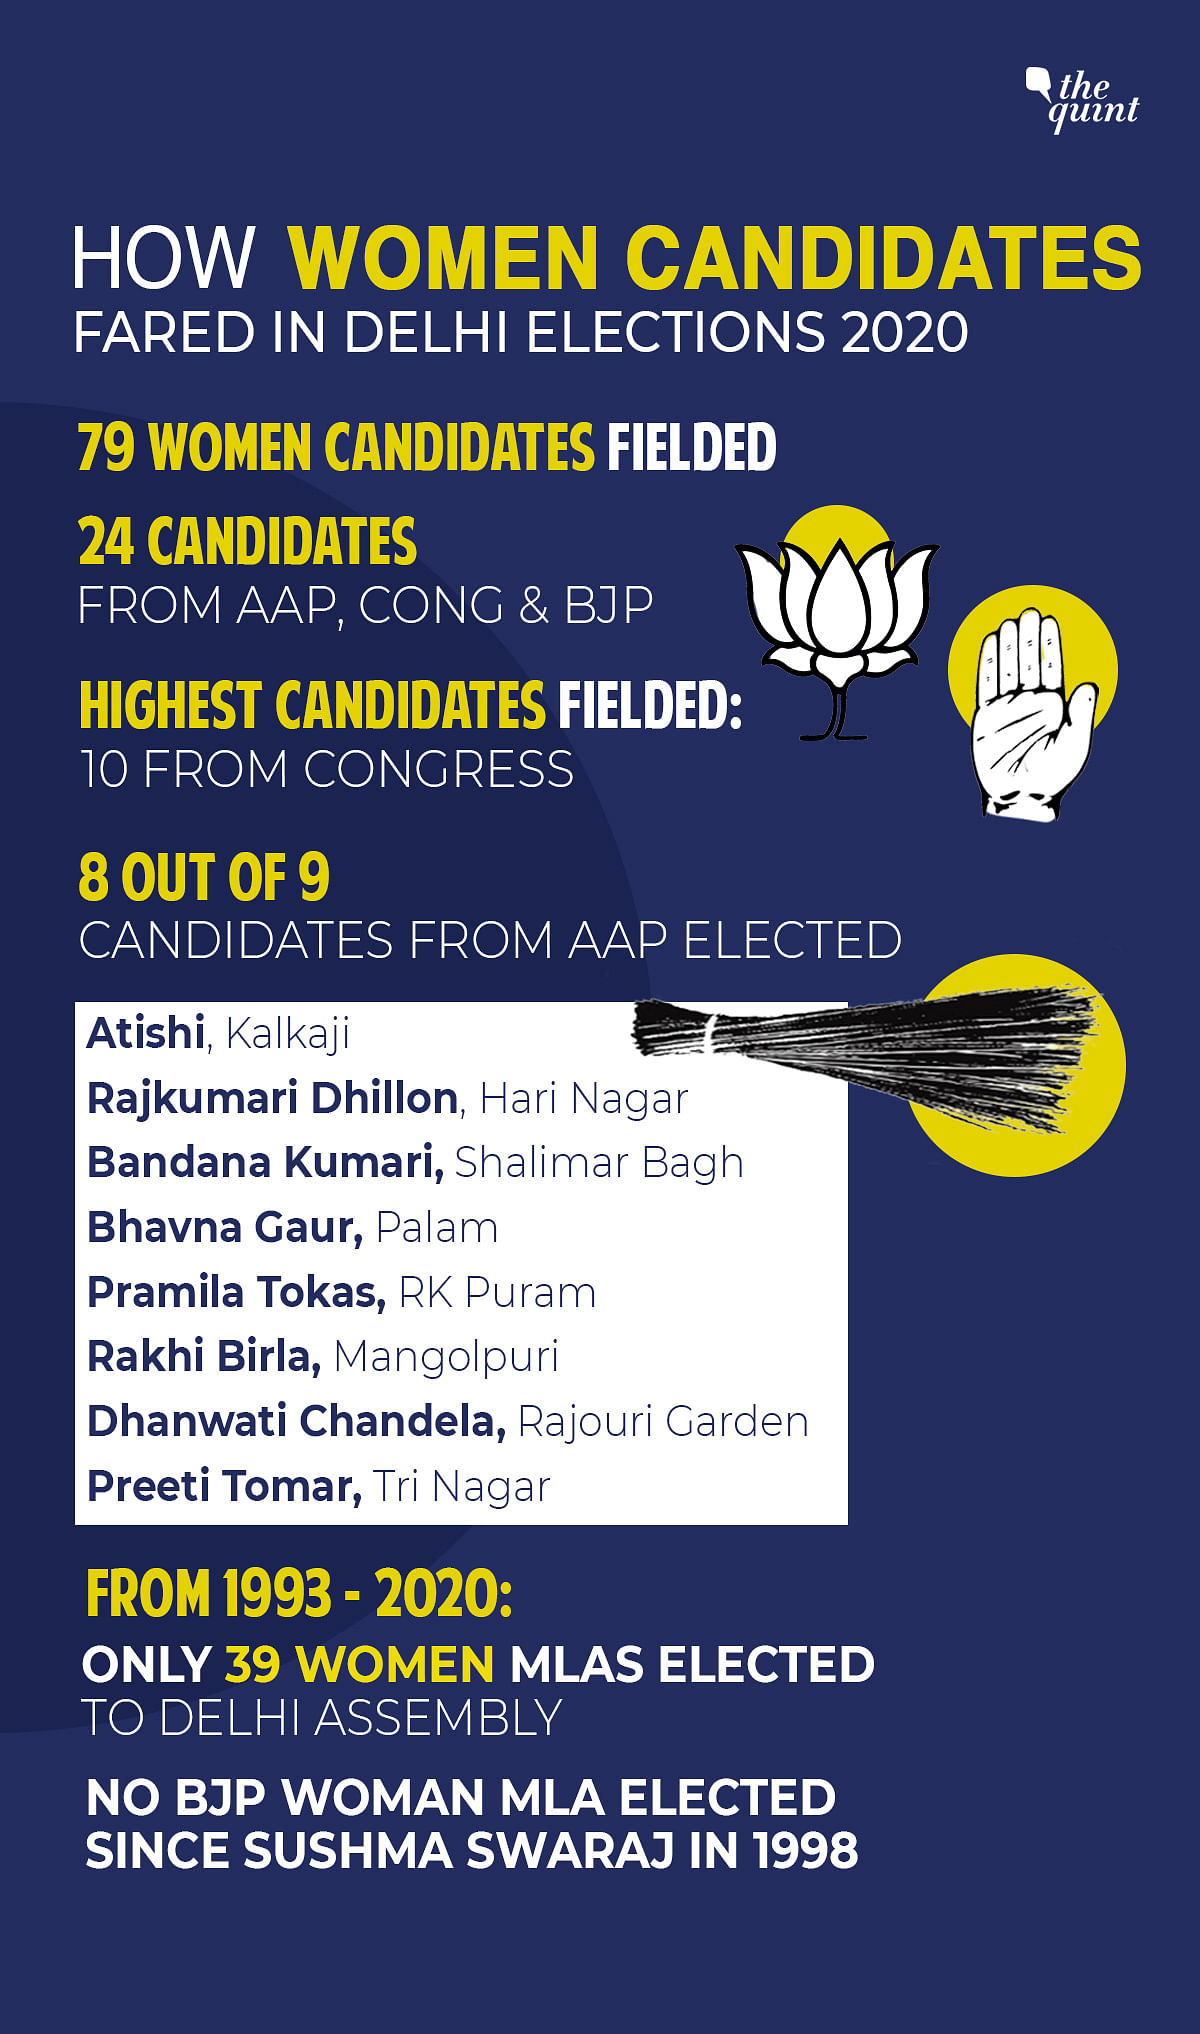 Only eight of the 79 women who contested the Delhi Assembly elections in 2020 have emerged victorious.